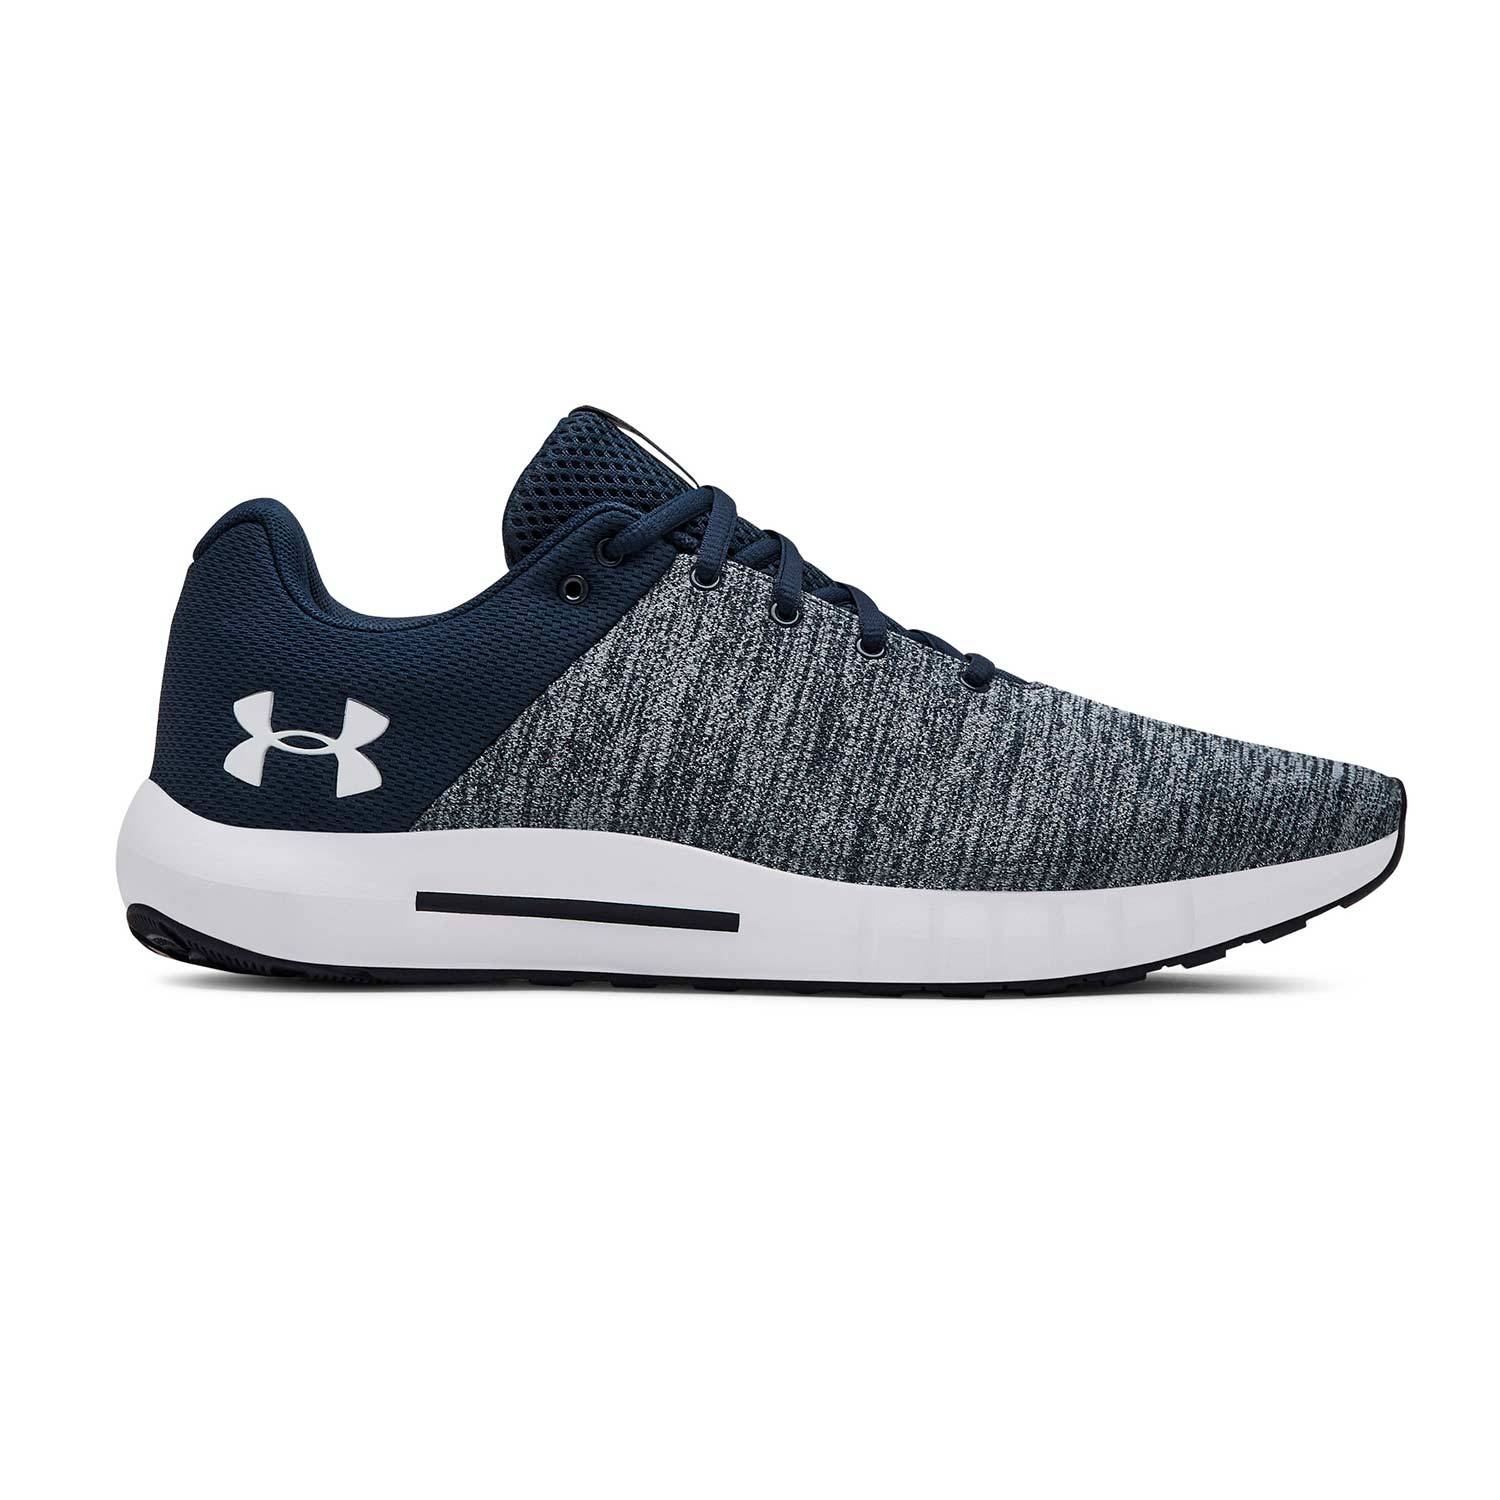 UNDER ARMOUR MICRO G PURSUIT TWIST RUNNING SHOES